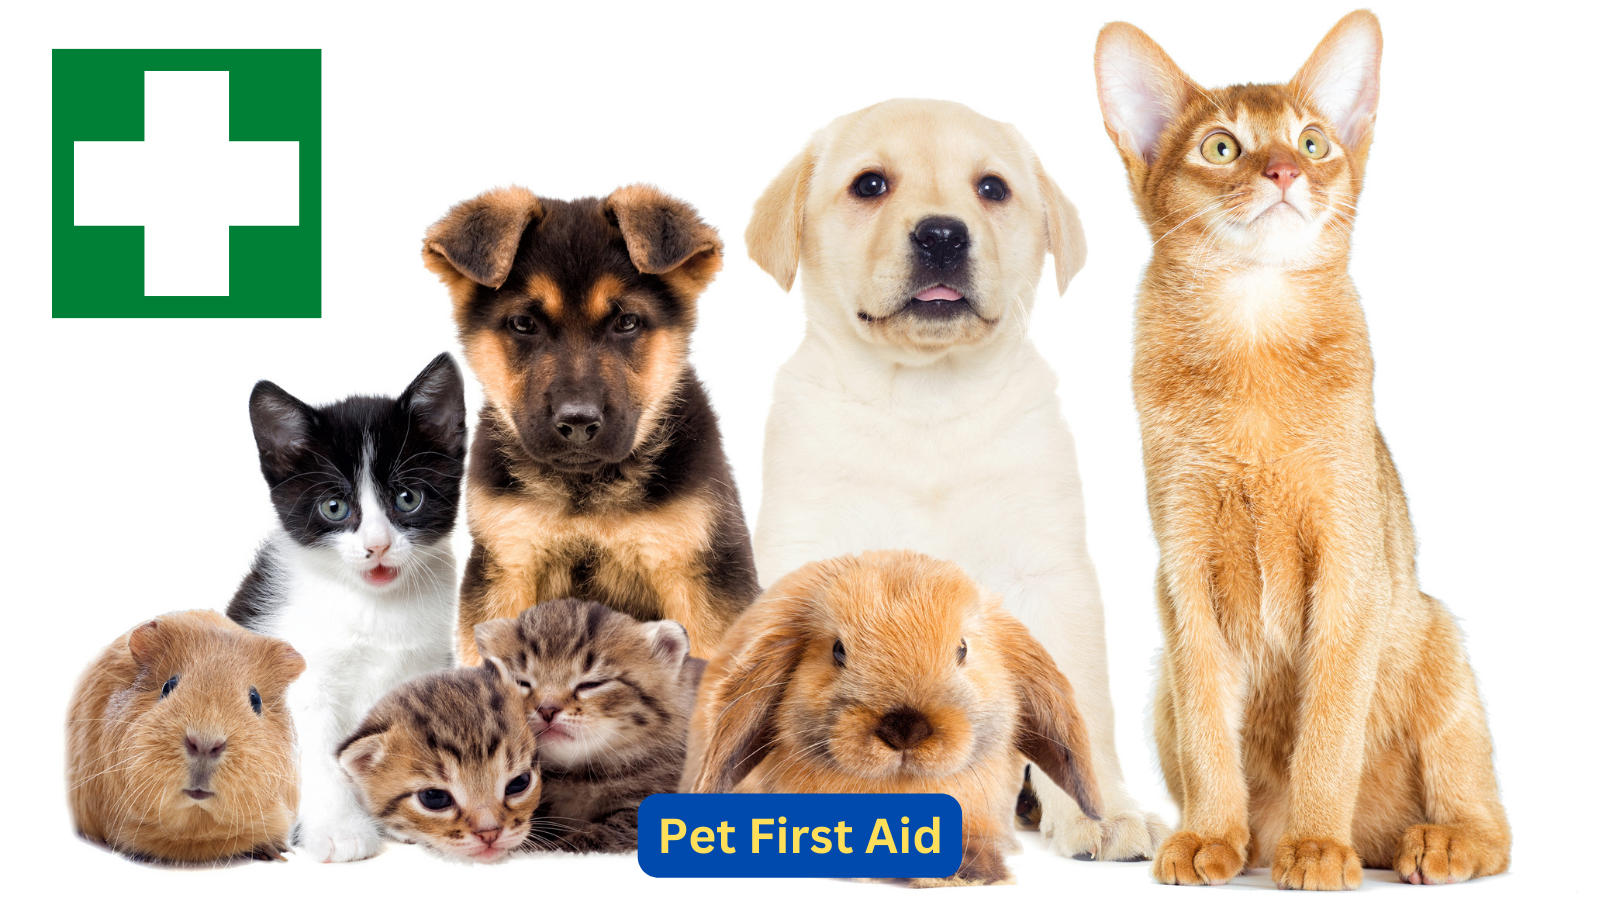 Pet First Aid (St Austell)